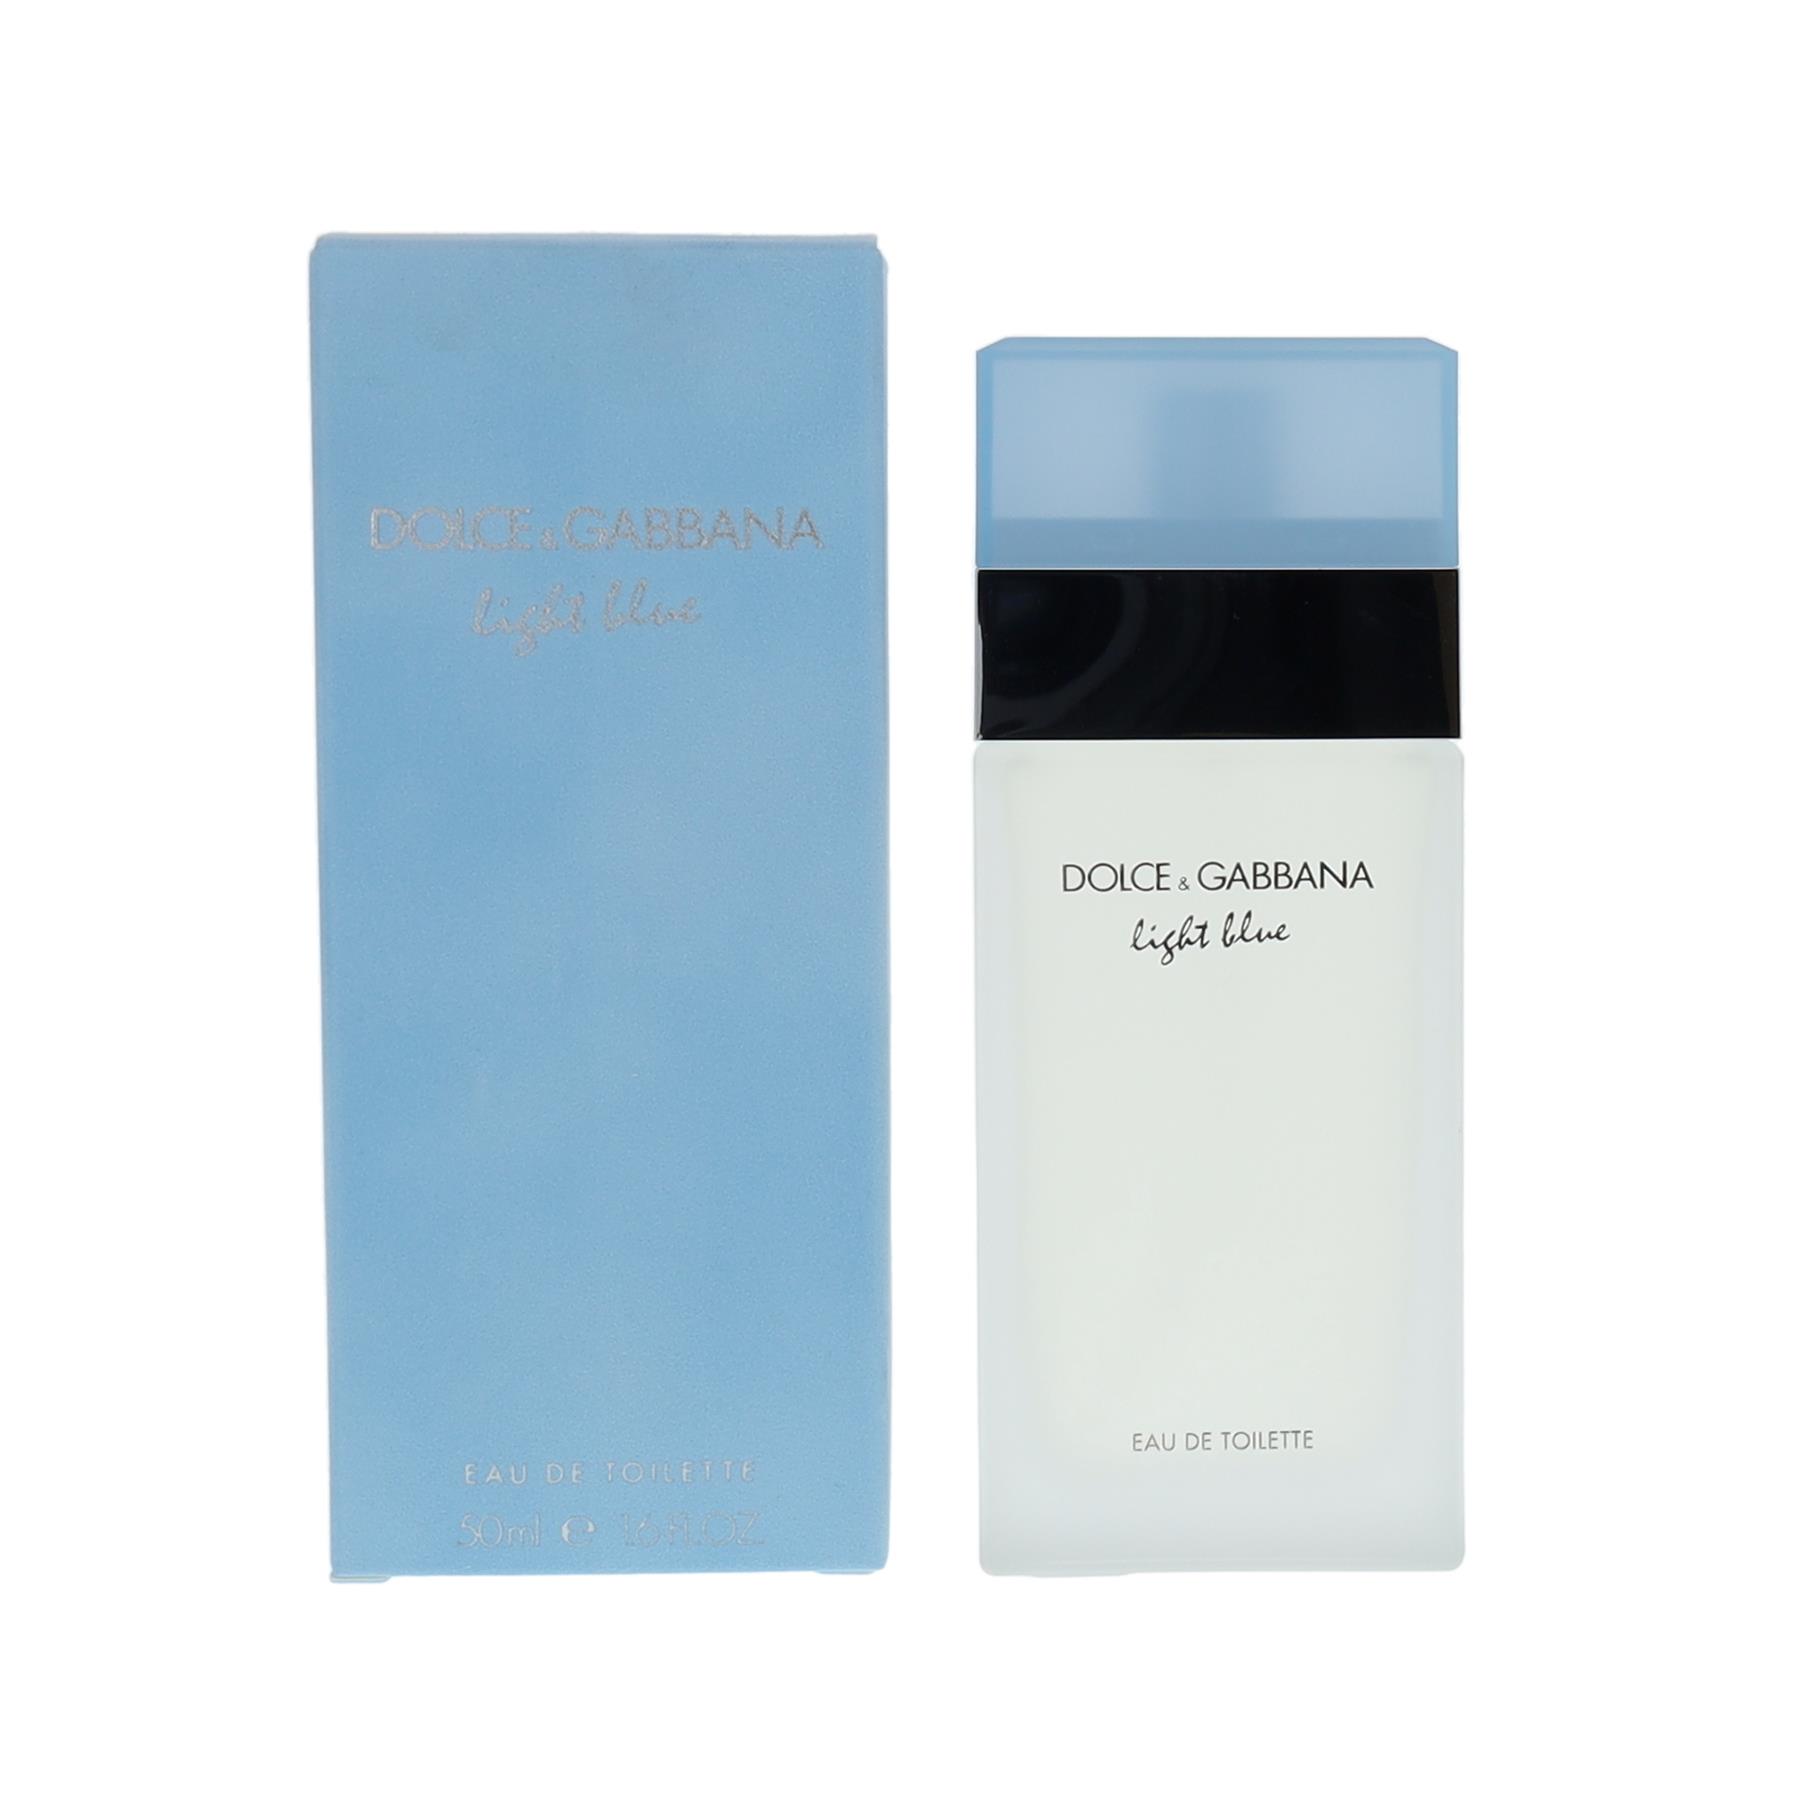 Dolce and Gabbana Light Blue 50ml Eau de Toilette Spray for Her from Perfume Plus Direct